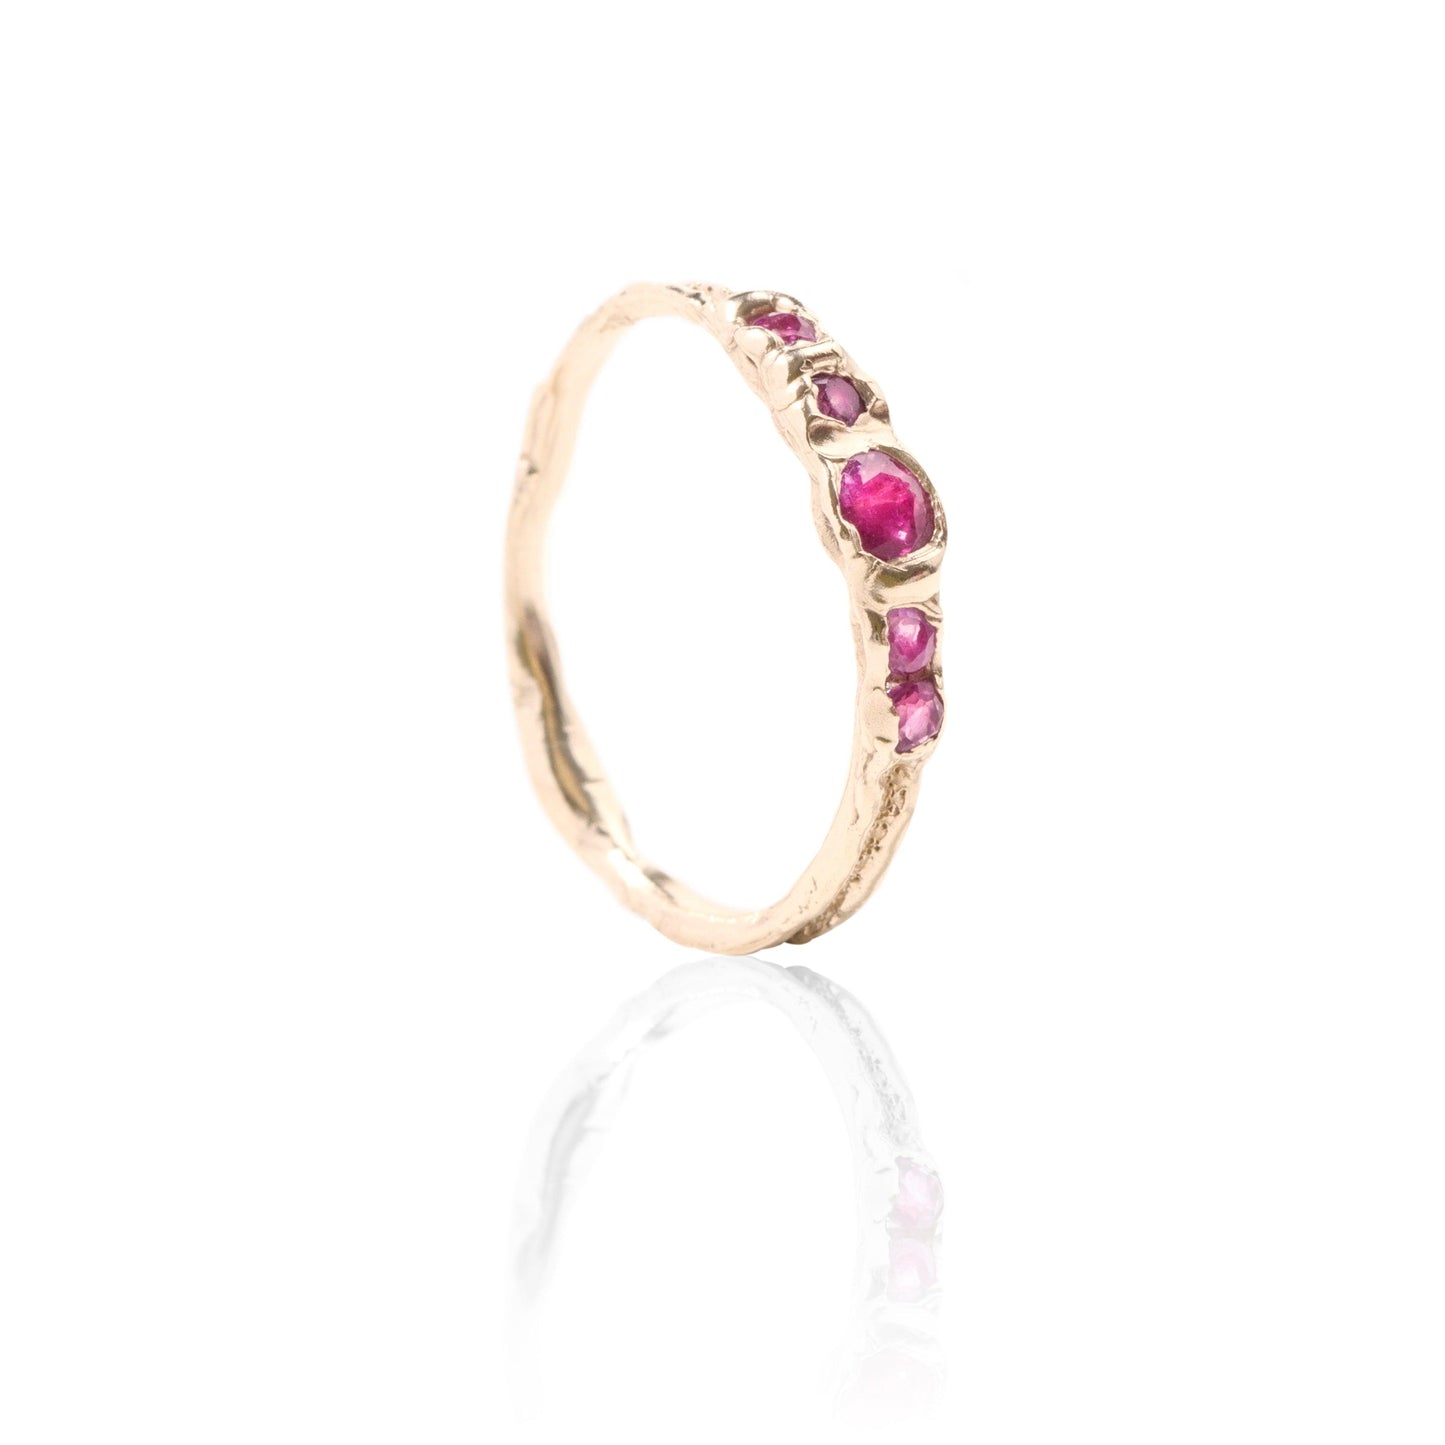 Gold ring set with pink sapphires, one of a kind - LaParra Jewels-BESPOKE HAND MADE JEWLERY LONDON